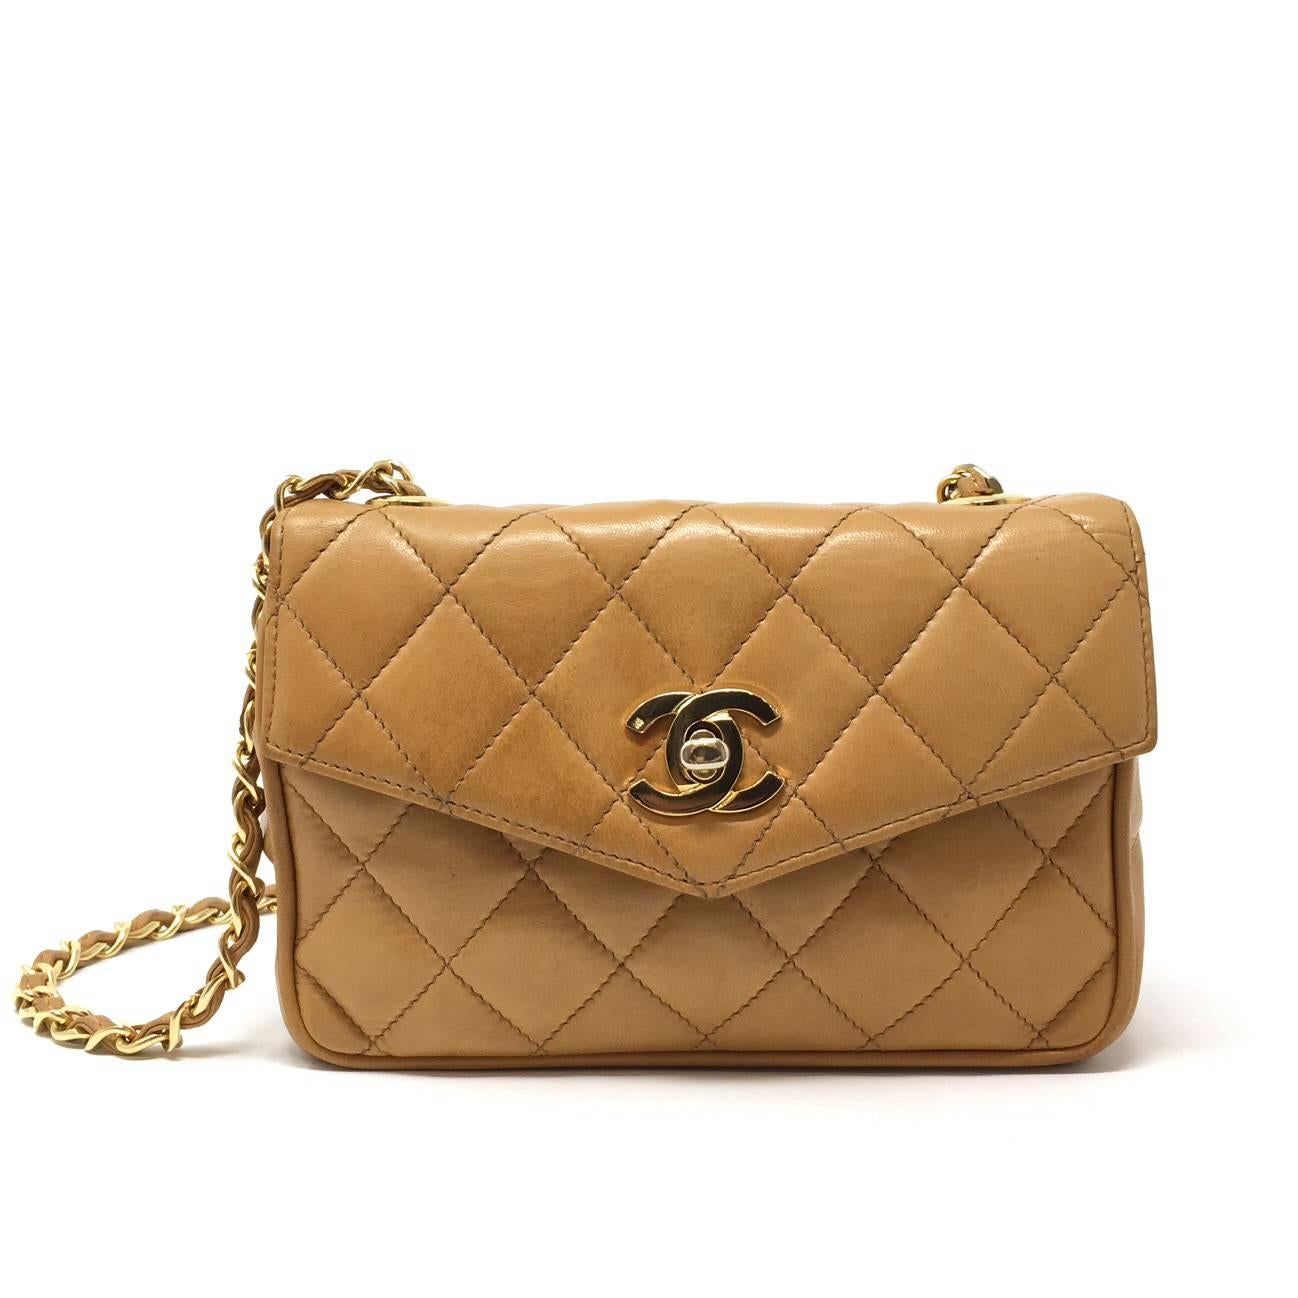 Delicious Vintage 80s Chanel Biscuit Colour Lambskin Matellasse' Mini Flap Shoulder Bag. Classic Gold-Plated CC Logo Twist Closure Opens Single Flap Style. Long Woven Chain And Leather Shoulder Strap. Identification  Vintage Code Inside. The Bag is